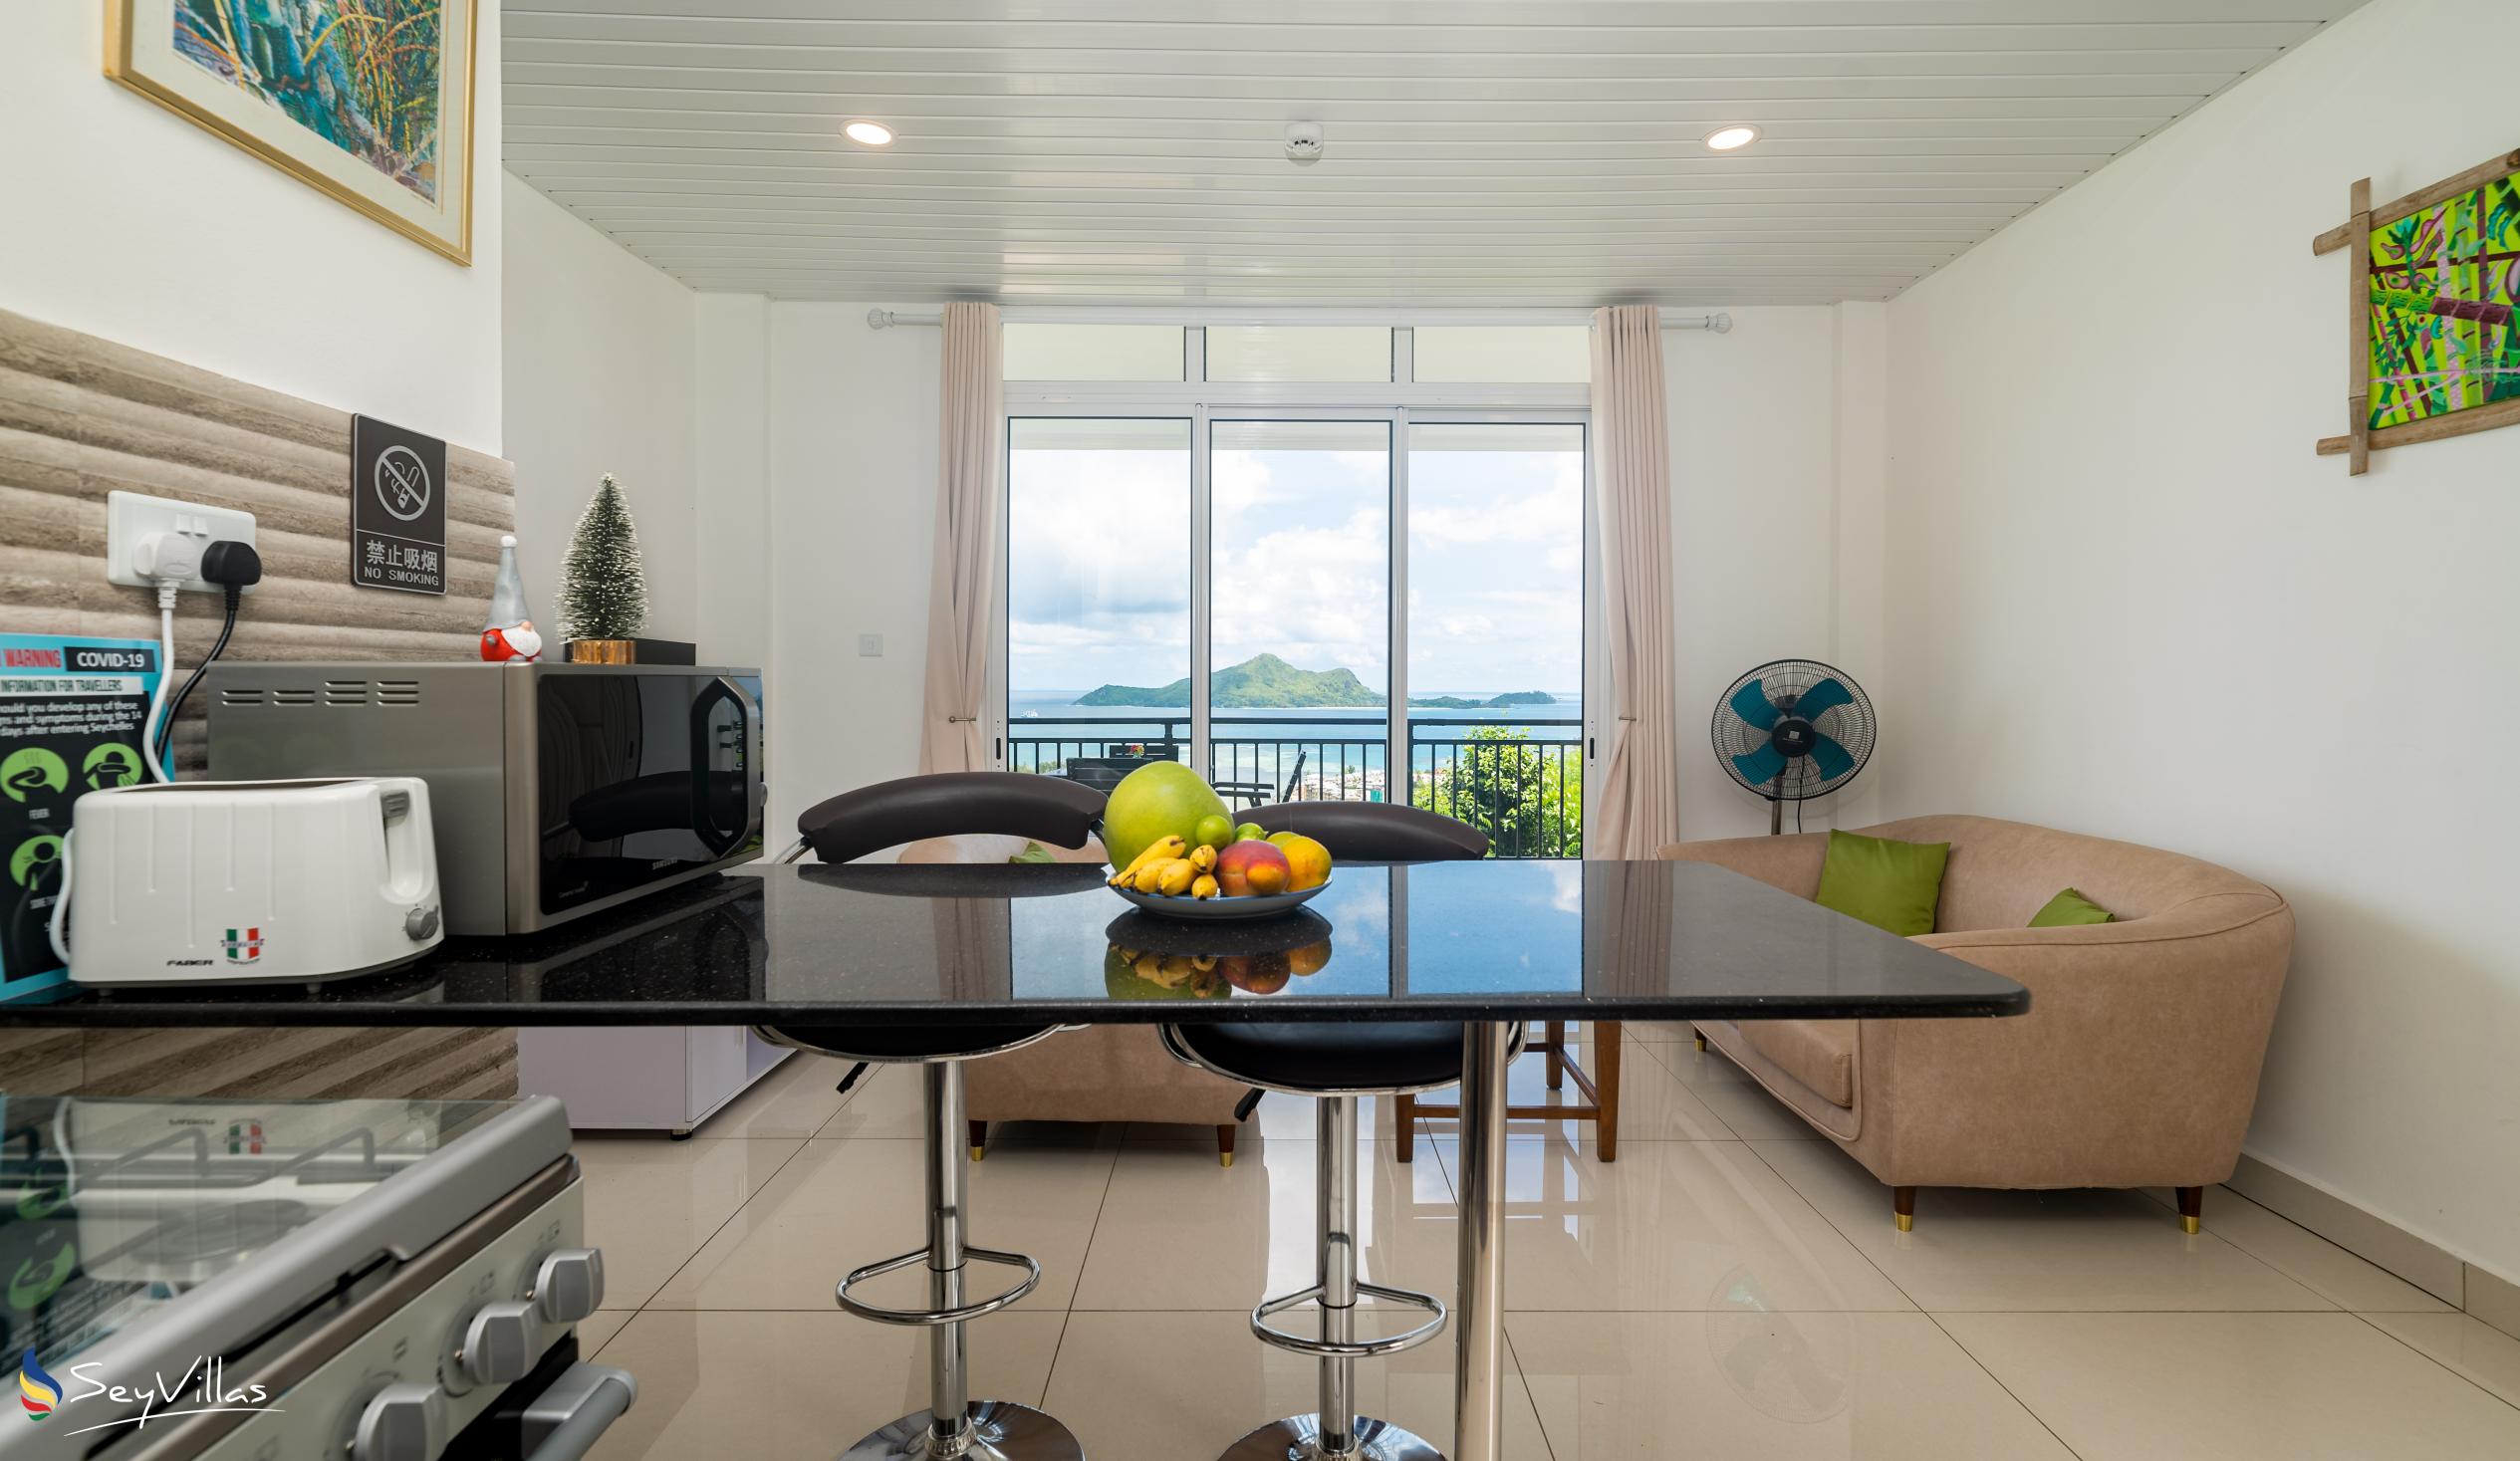 Photo 53: Creole Pearl Self Catering - 1-Bedroom Apartment - Mahé (Seychelles)